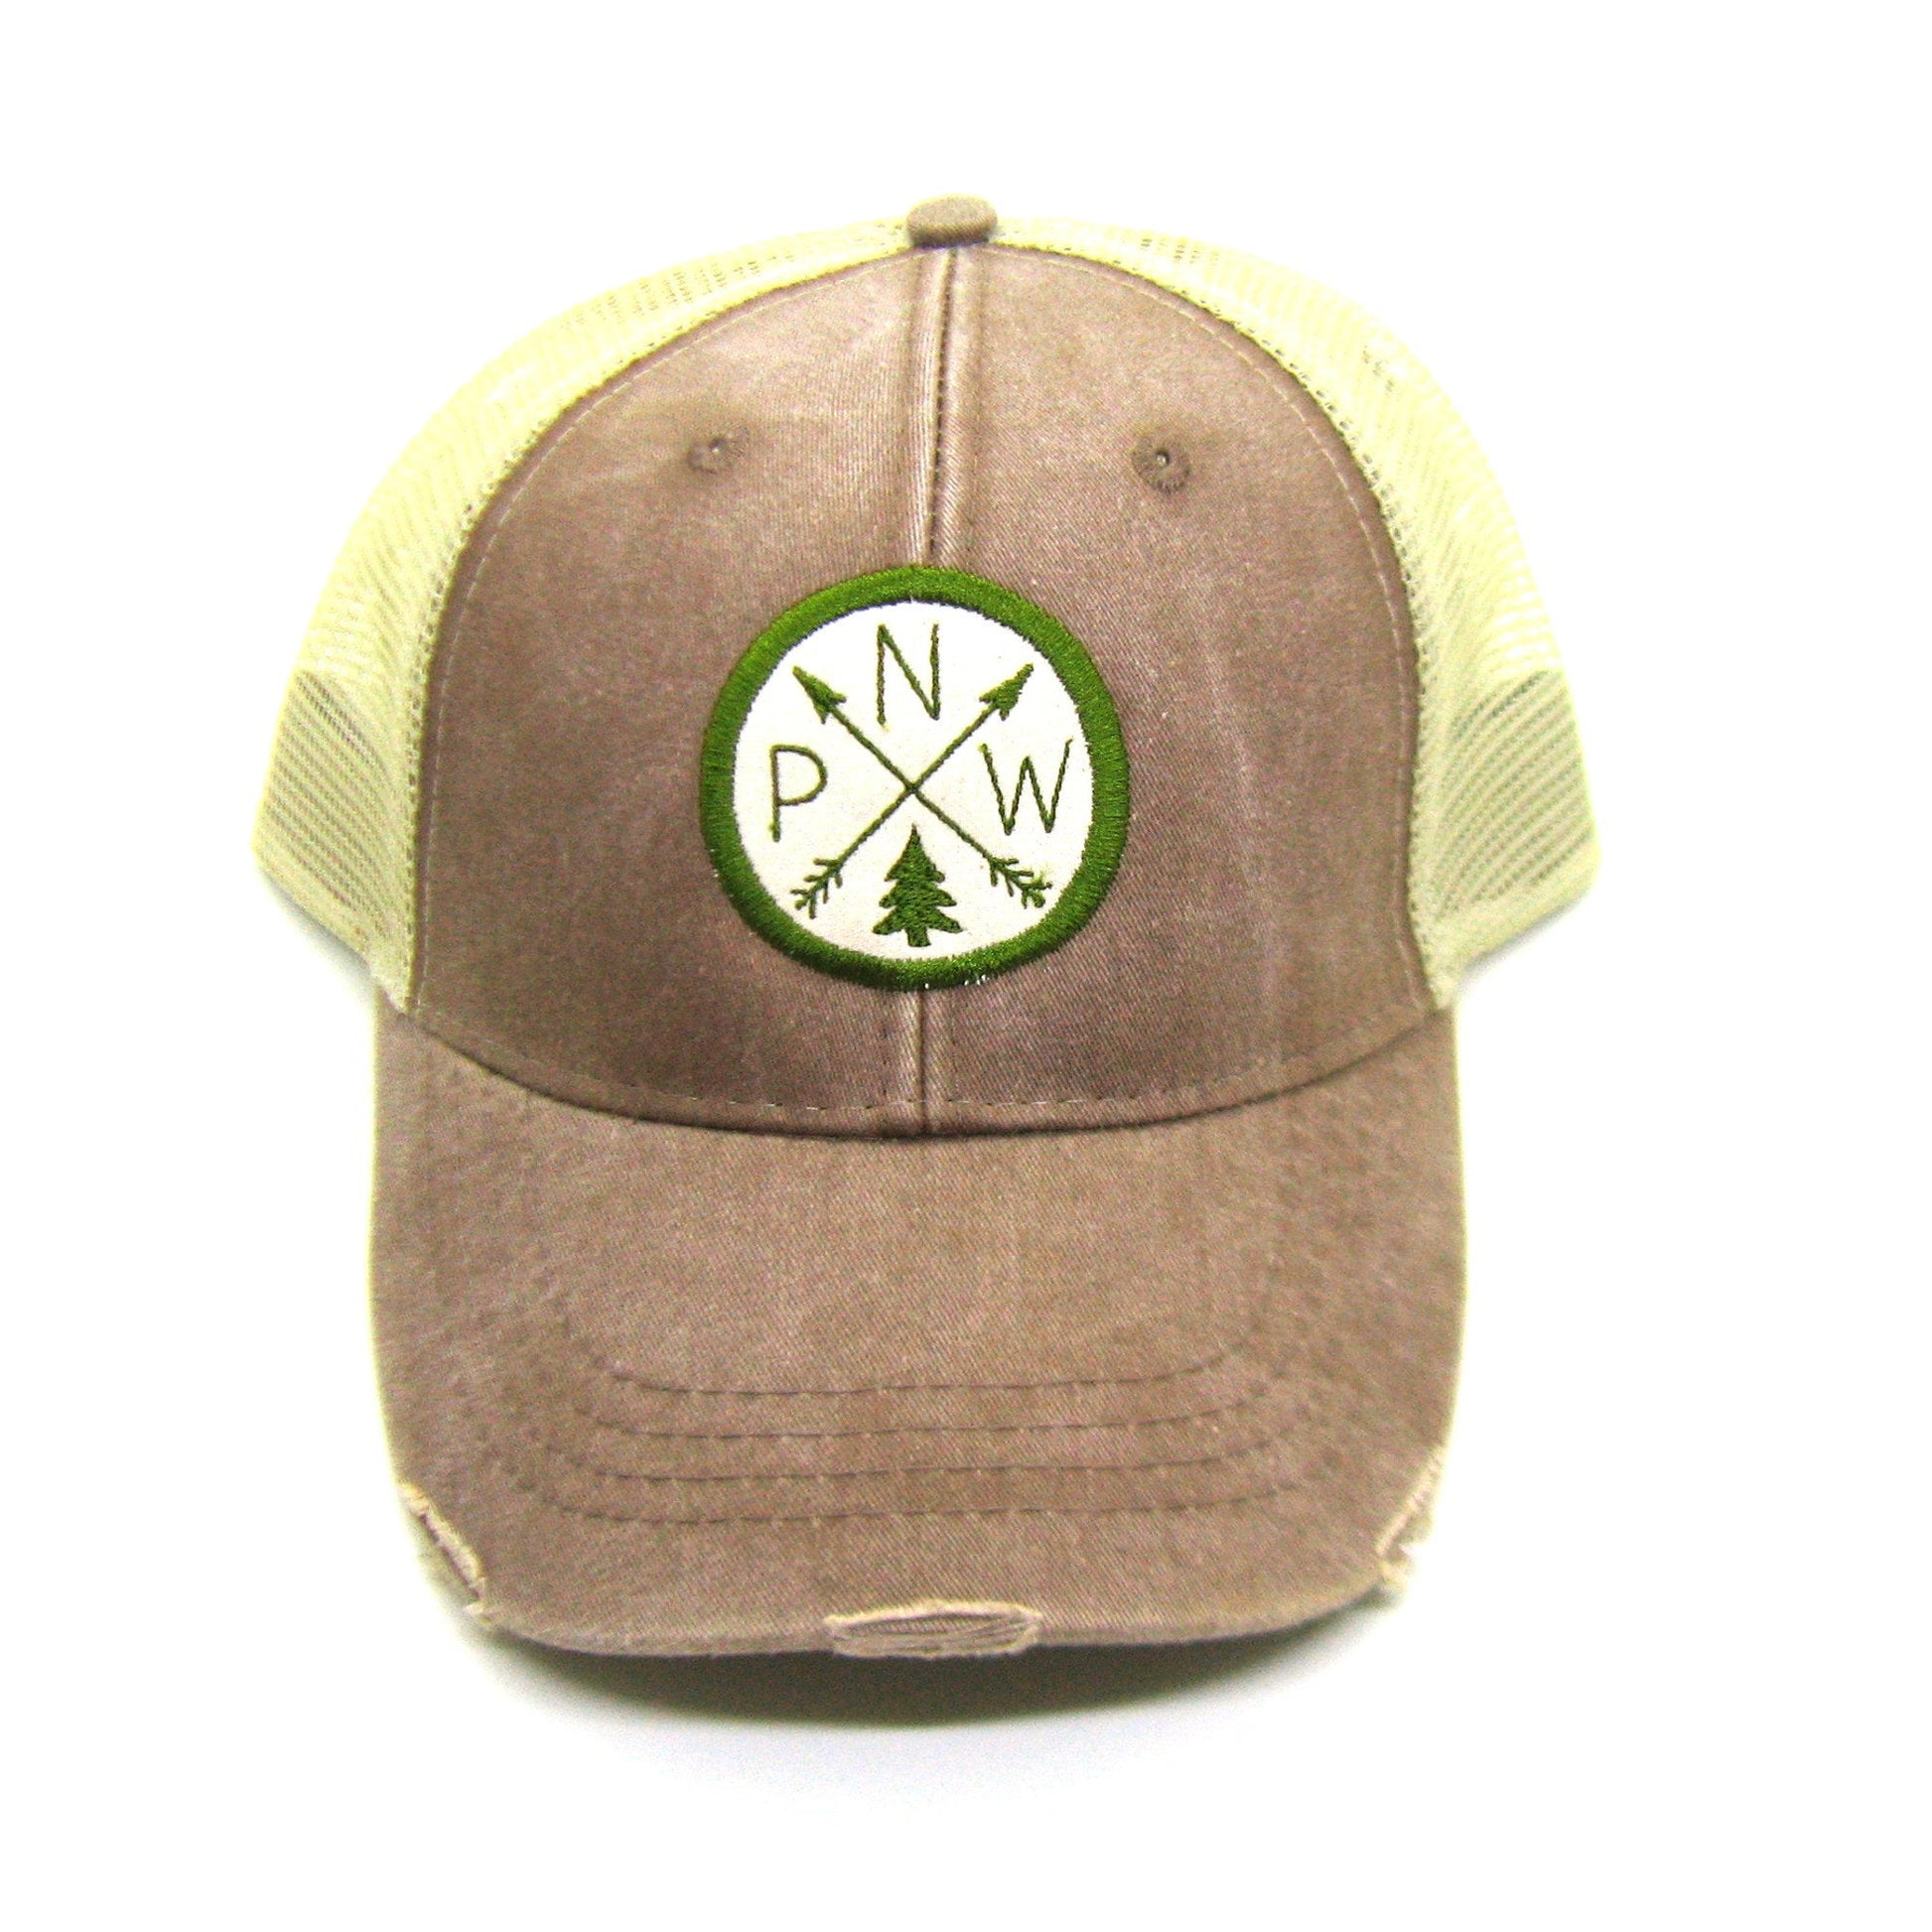 Gracie Designs Oregon Hat Distressed Gray Trucker with Fabric Patch